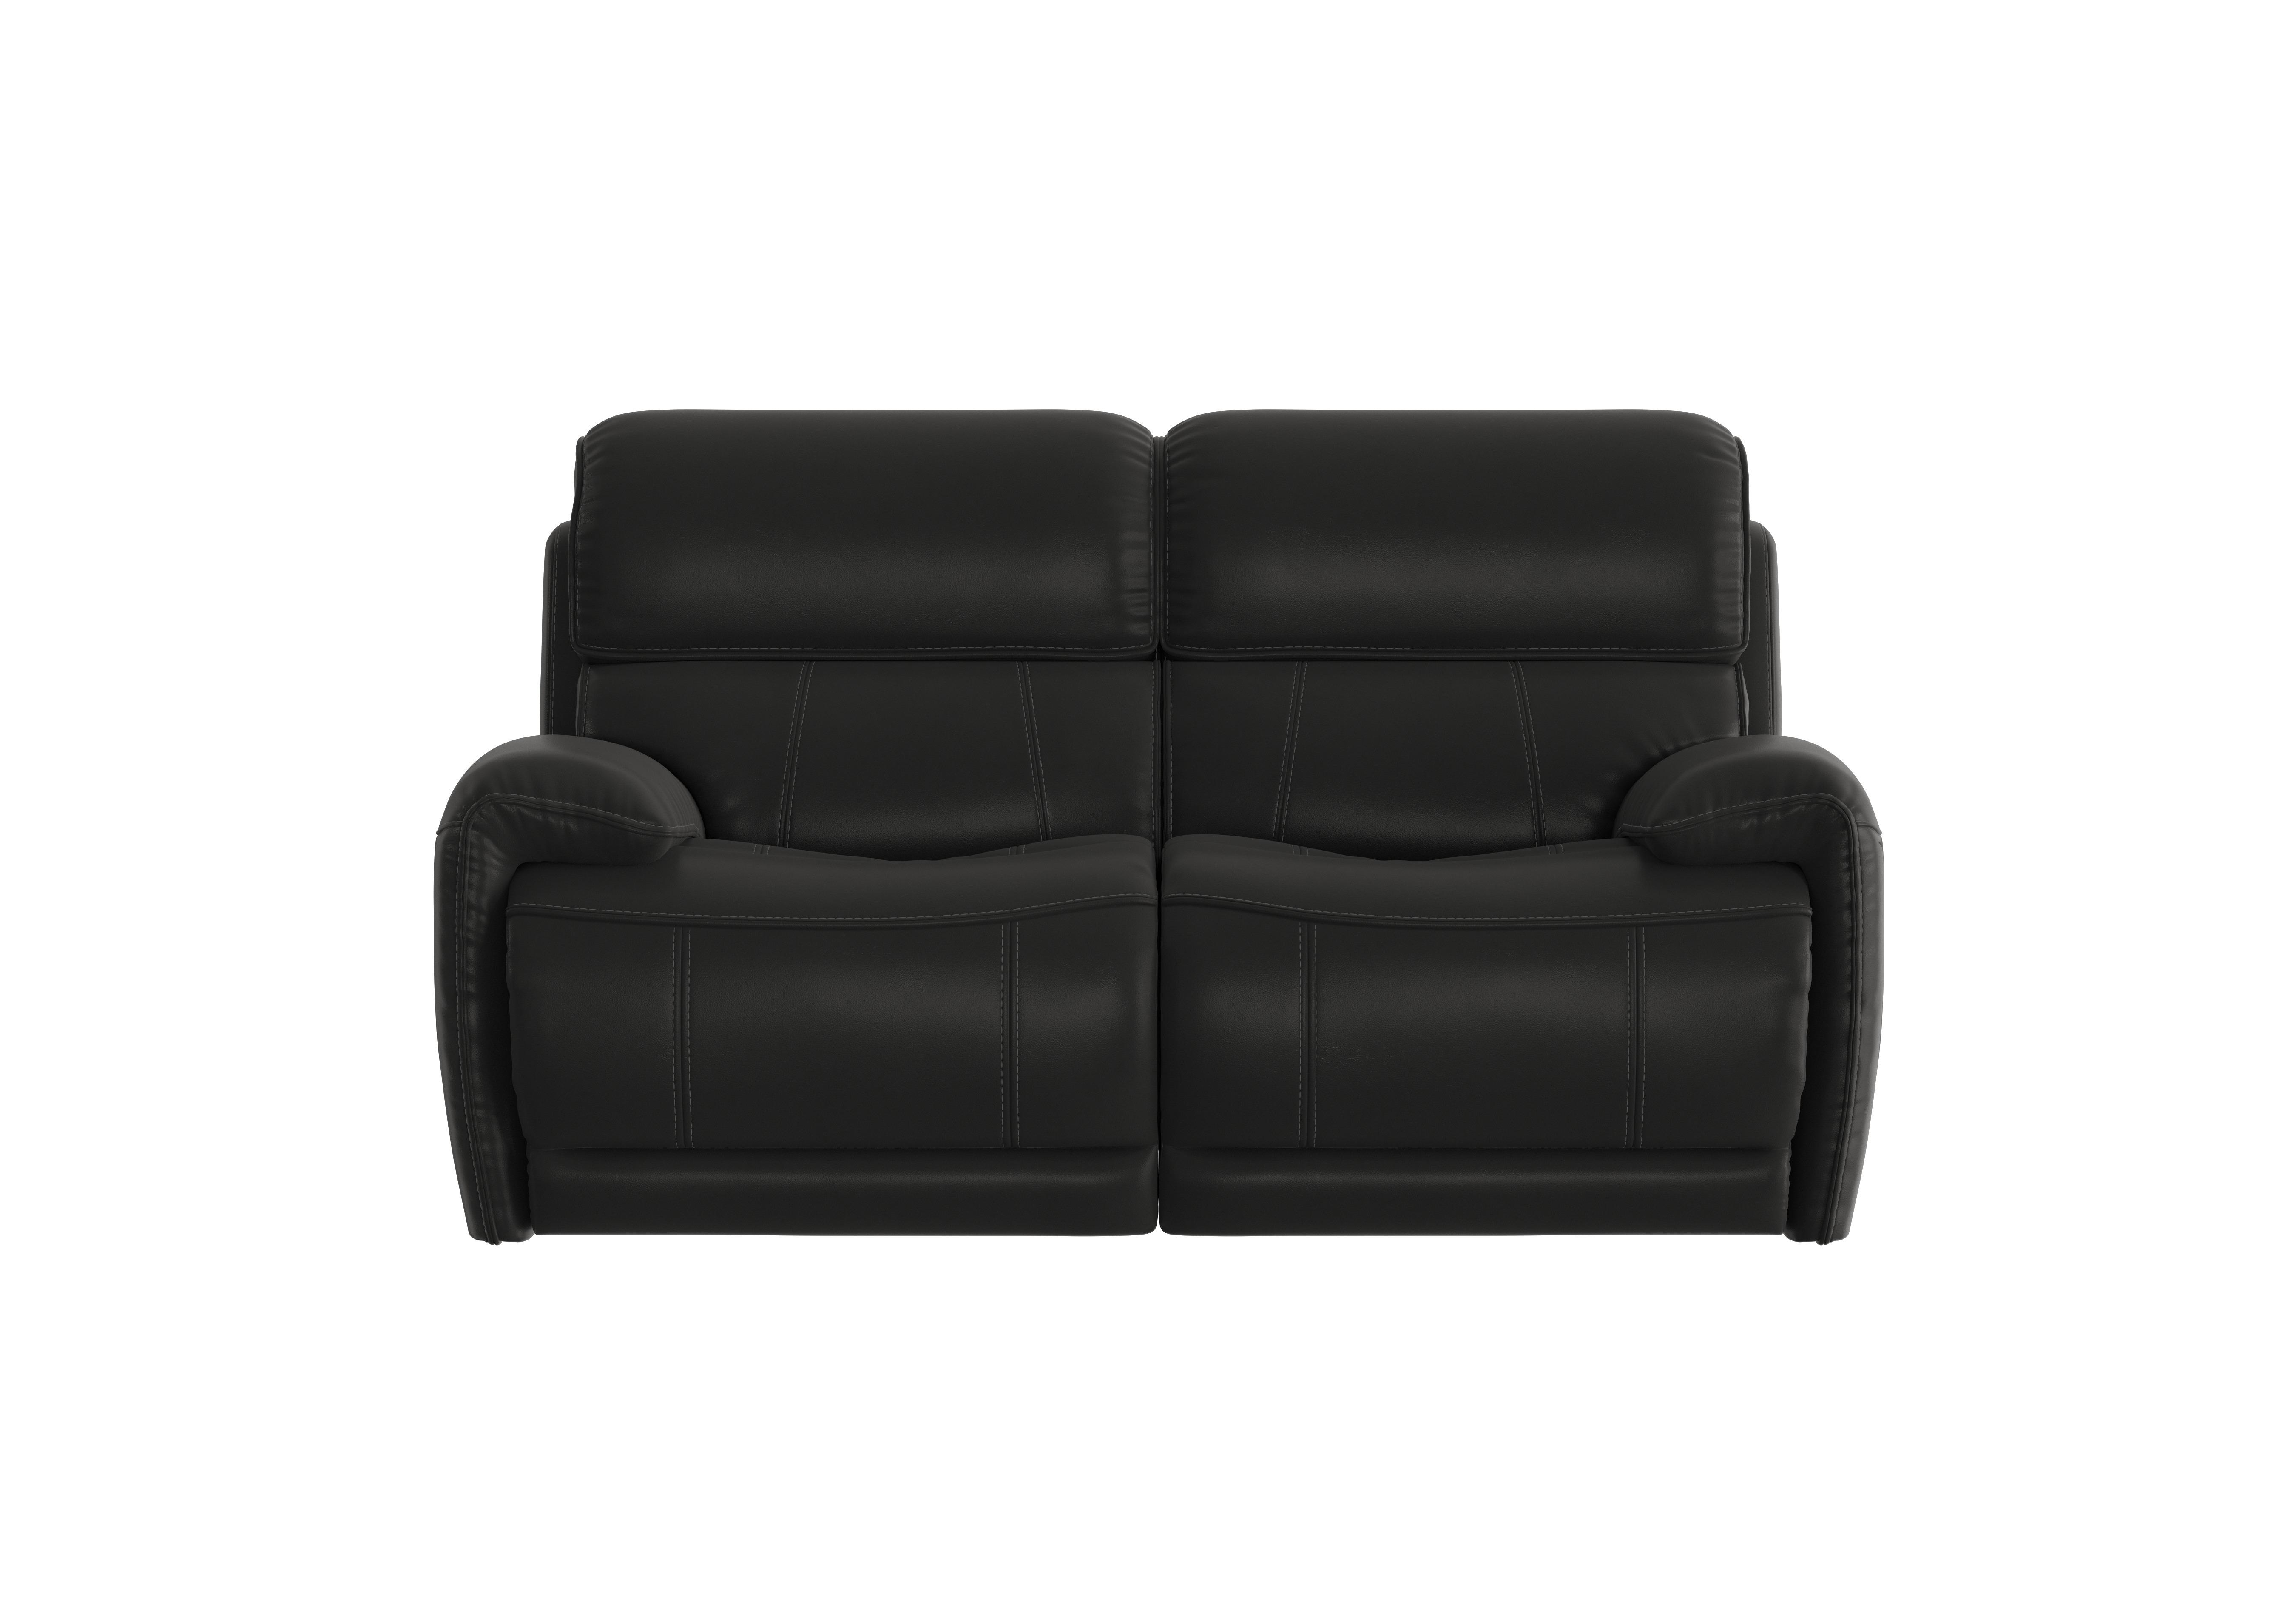 Link 2 Seater Leather Power Recliner Sofa with Power Headrests in Bv-3500 Classic Black on Furniture Village